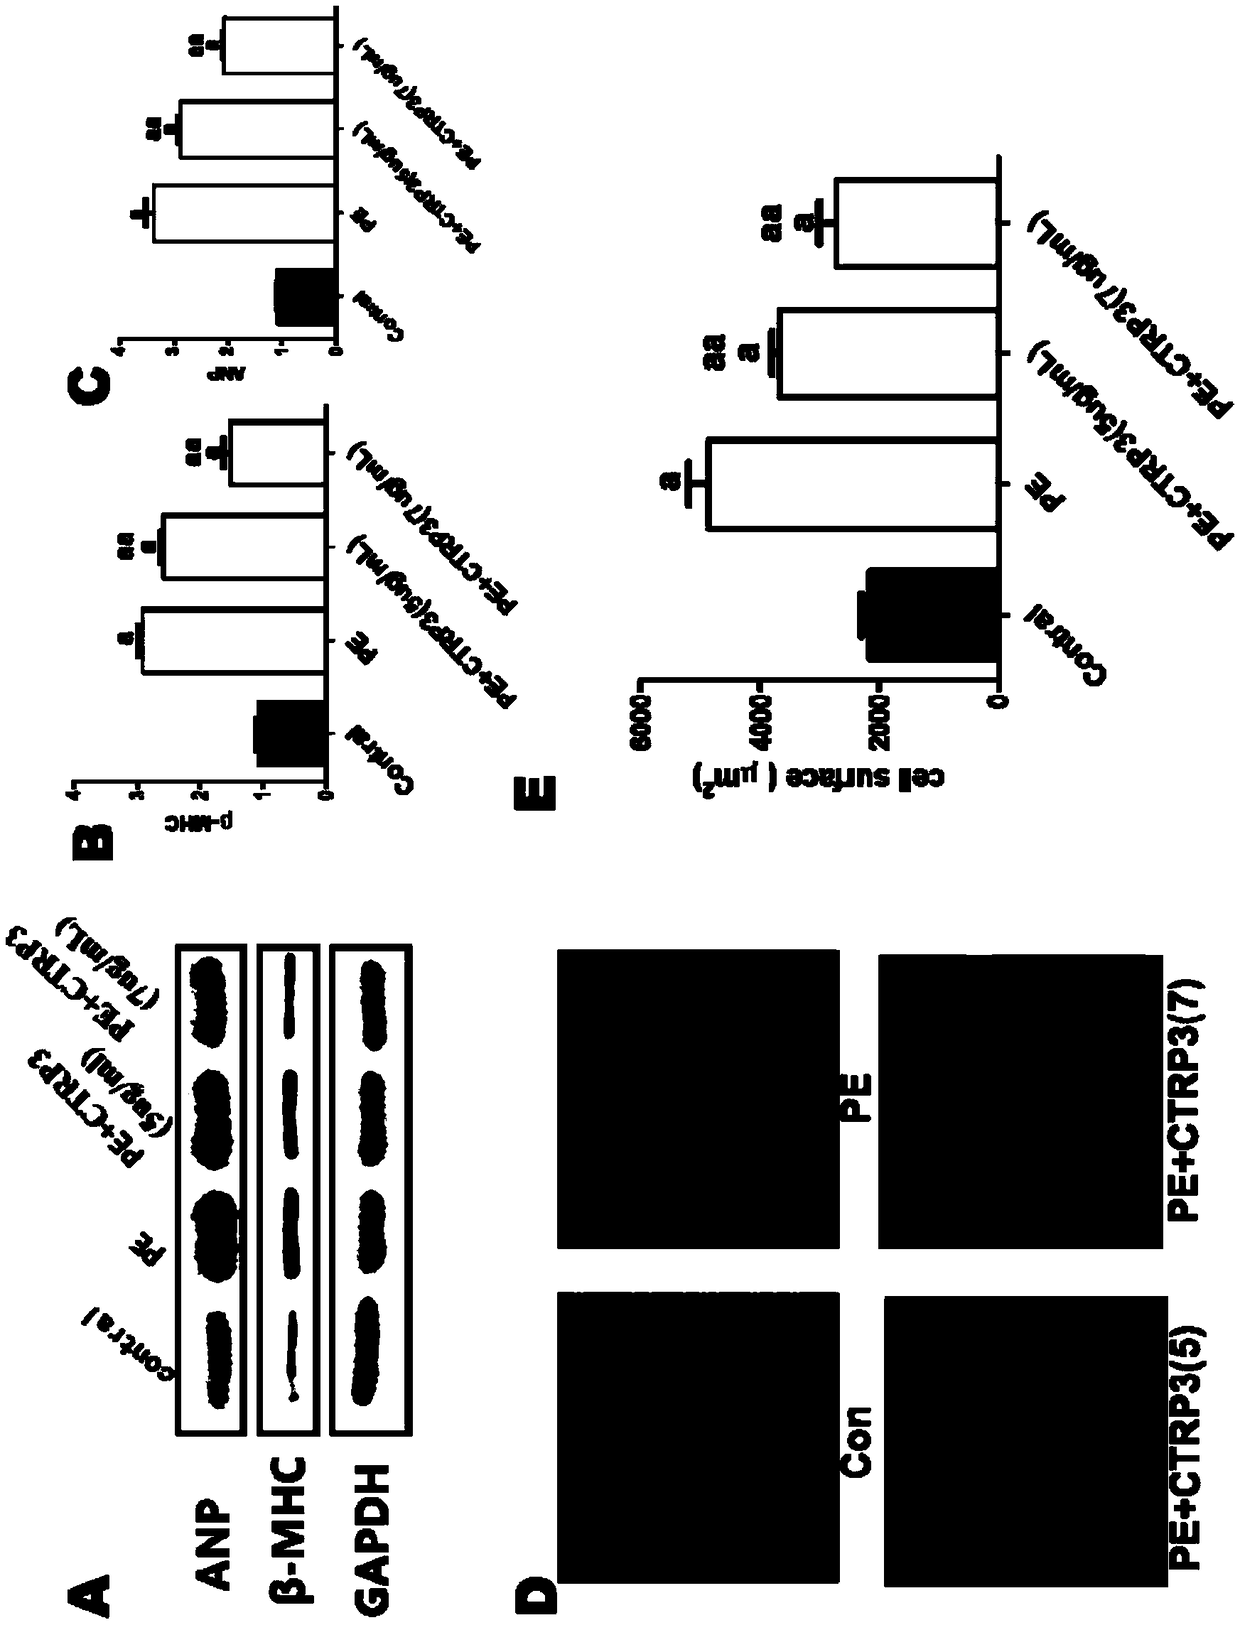 Application of CTRP3 to preparation of drugs for preventing and treating cardiac hypertrophy